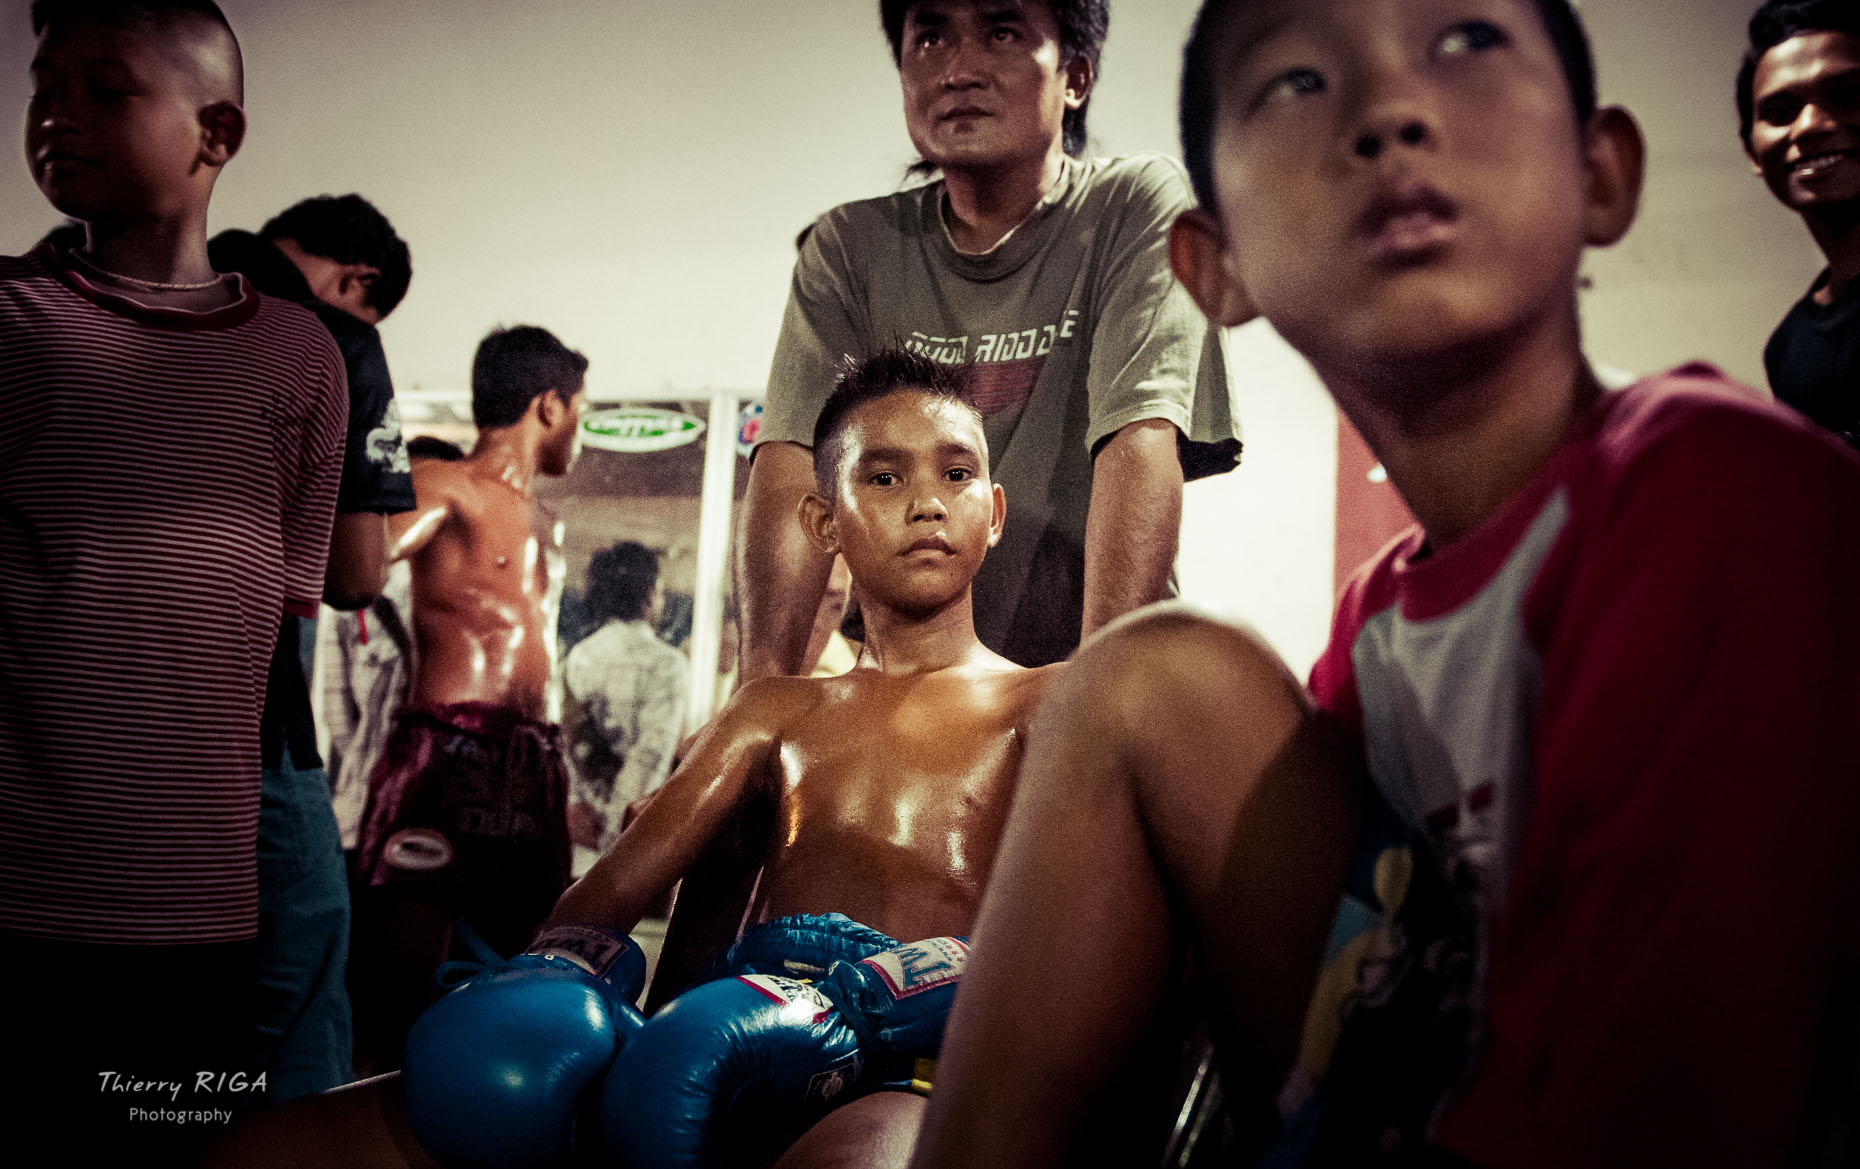 Warming up before the fight, Muay Thai, Thailand